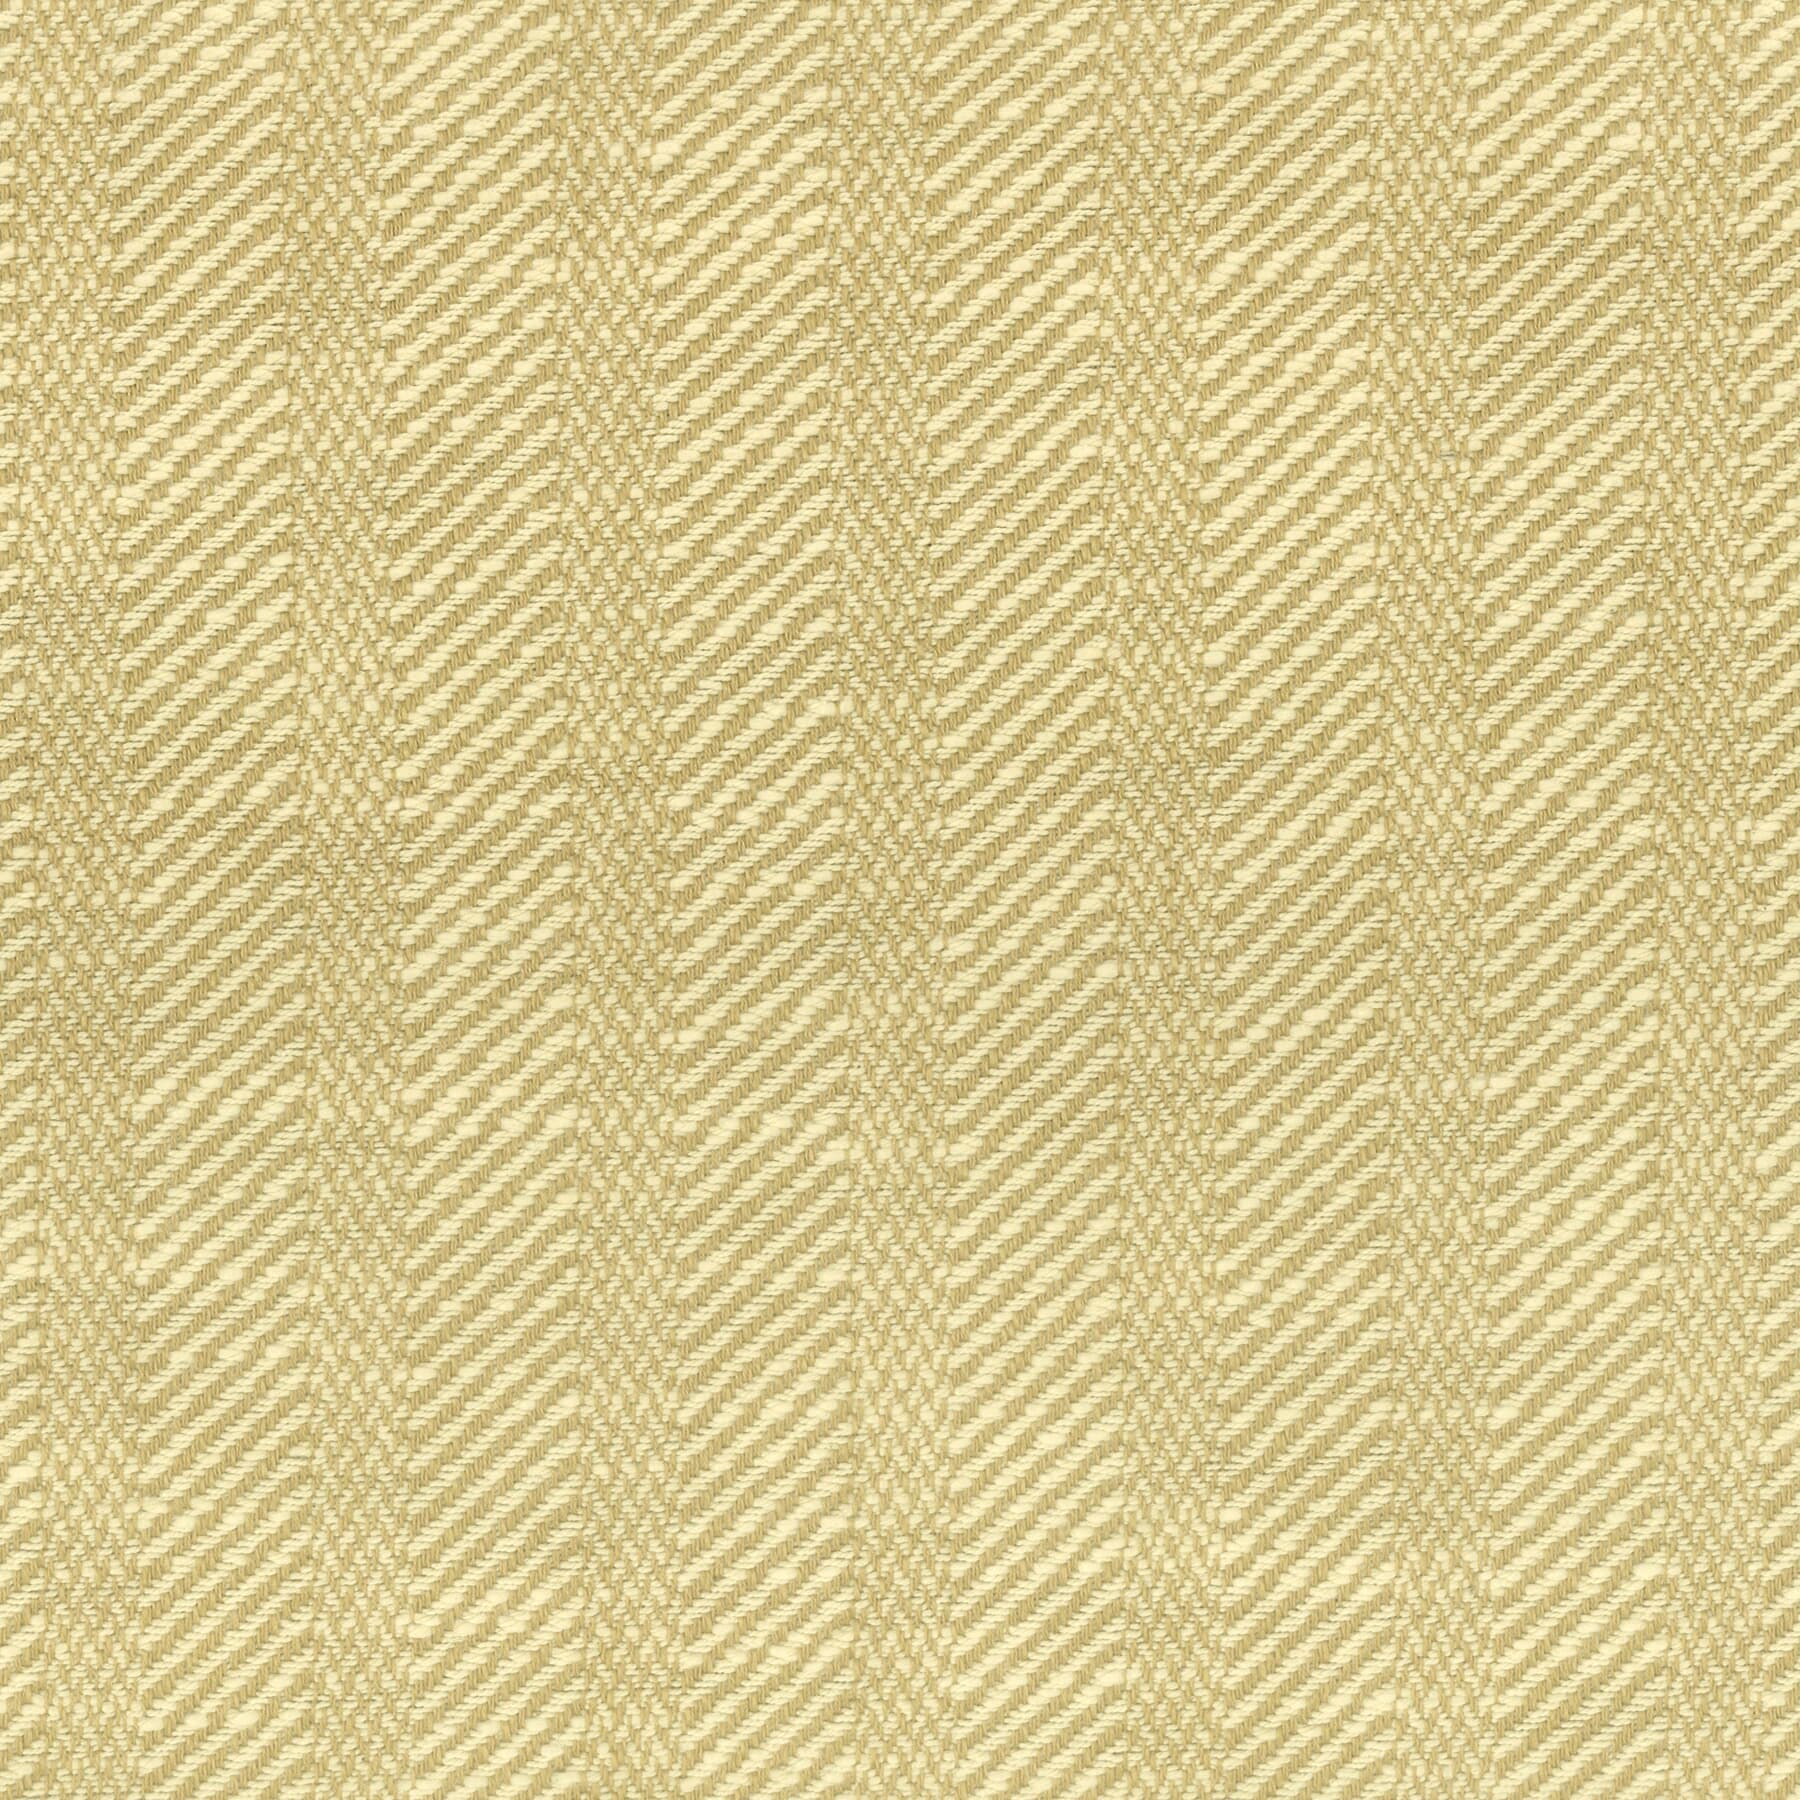 7650-07 Textured Stripe by Stout Fabric